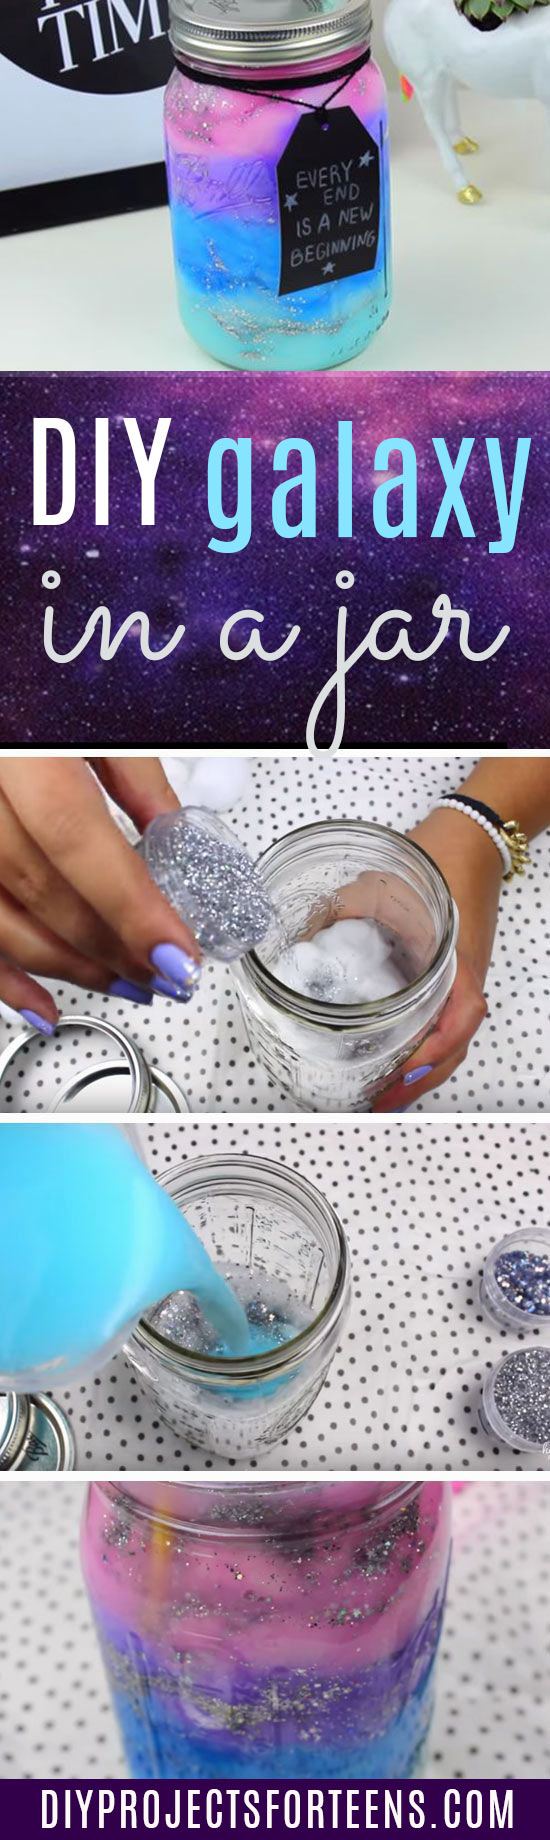 Best DIY Ideas for Teens To Make This Summer - DIY Galaxy In A Jar - Fun and Easy Crafts, Room Decor, Toys and Craft Projects to Make And Sell - Cool Gifts for Friends, Awesome Things To Do When You Are Bored - Teenagers - Boys and Girls Love Making These Creative Projects With Step by Step Tutorials and Instructions #diyideas #summer #teencrafts #crafts